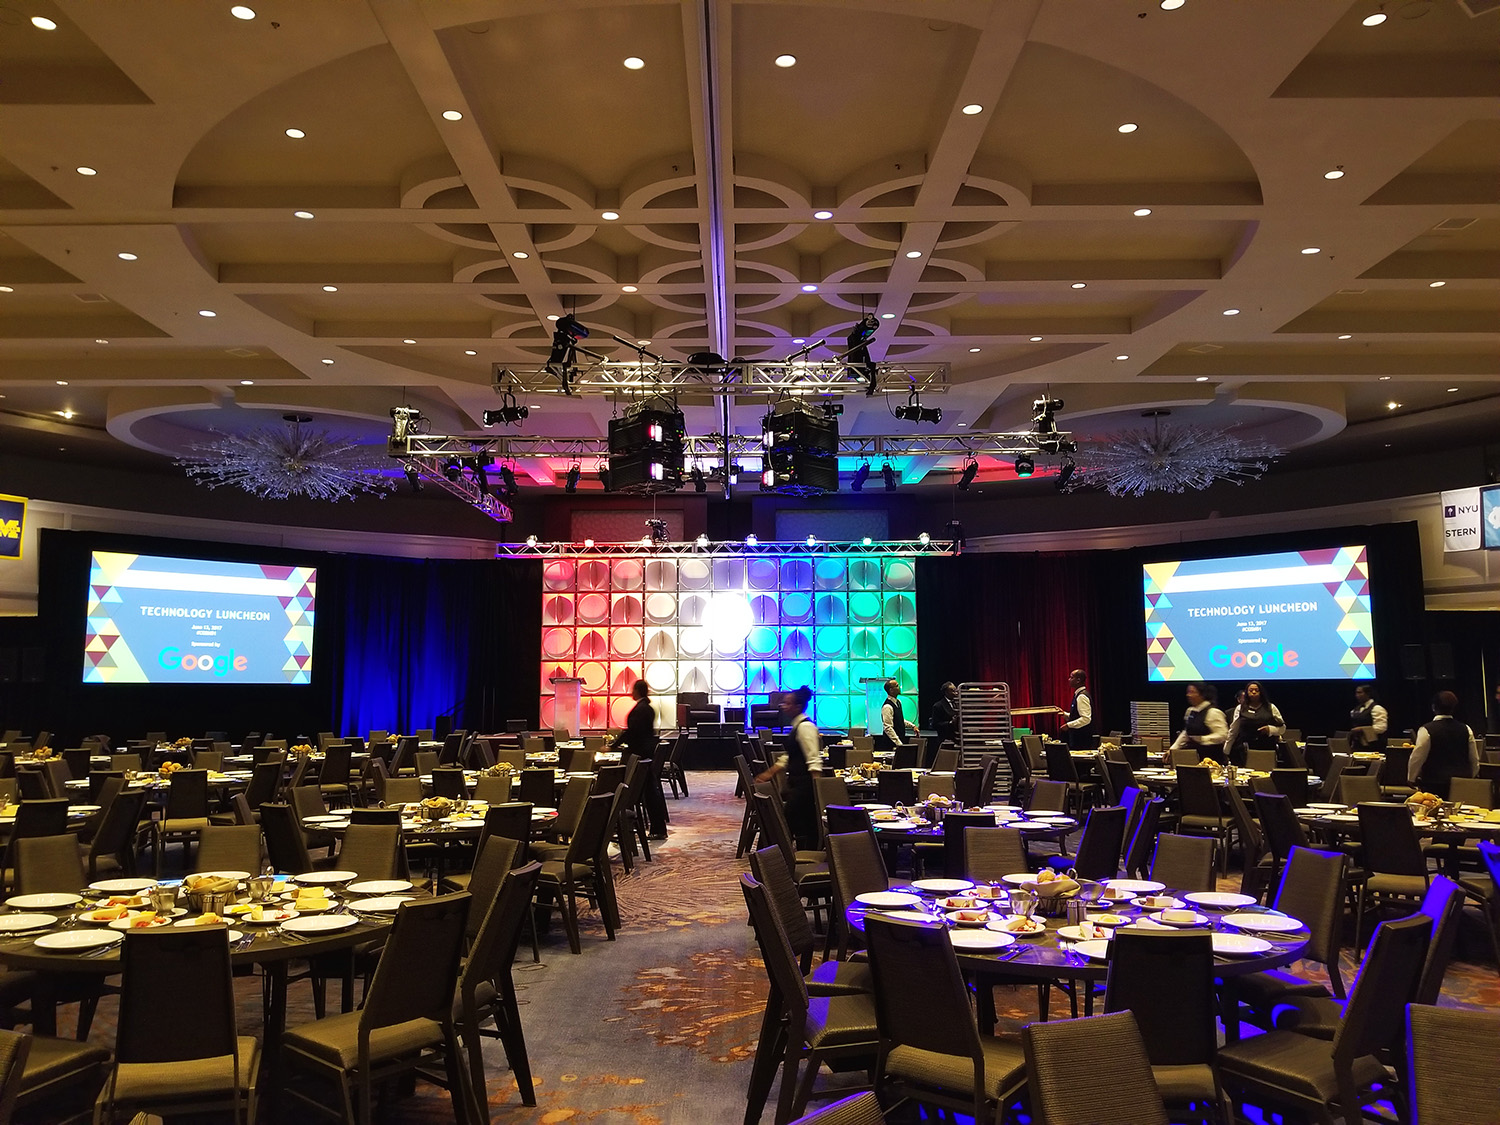 A banquet hall set for a 'Technology Luncheon' with Google branding on screens, arranged tables, and stage lighting equipment overhead.